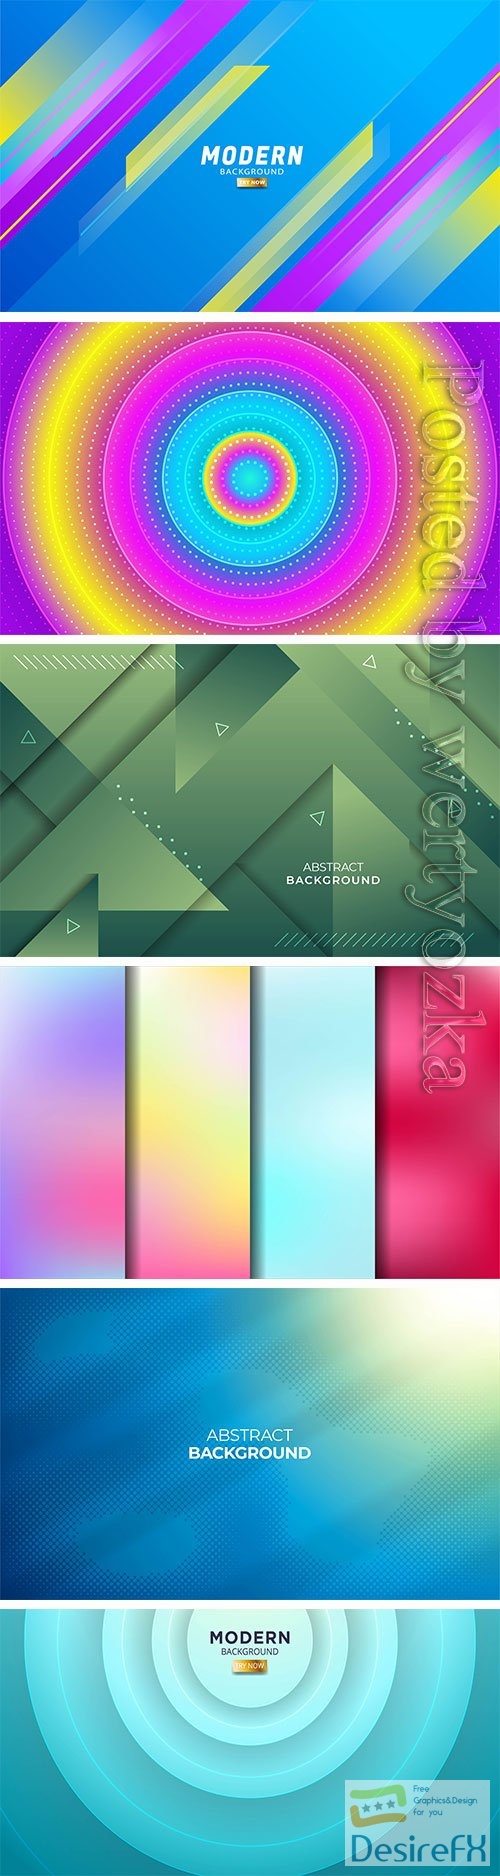 Colorful abstract vector background with geometric